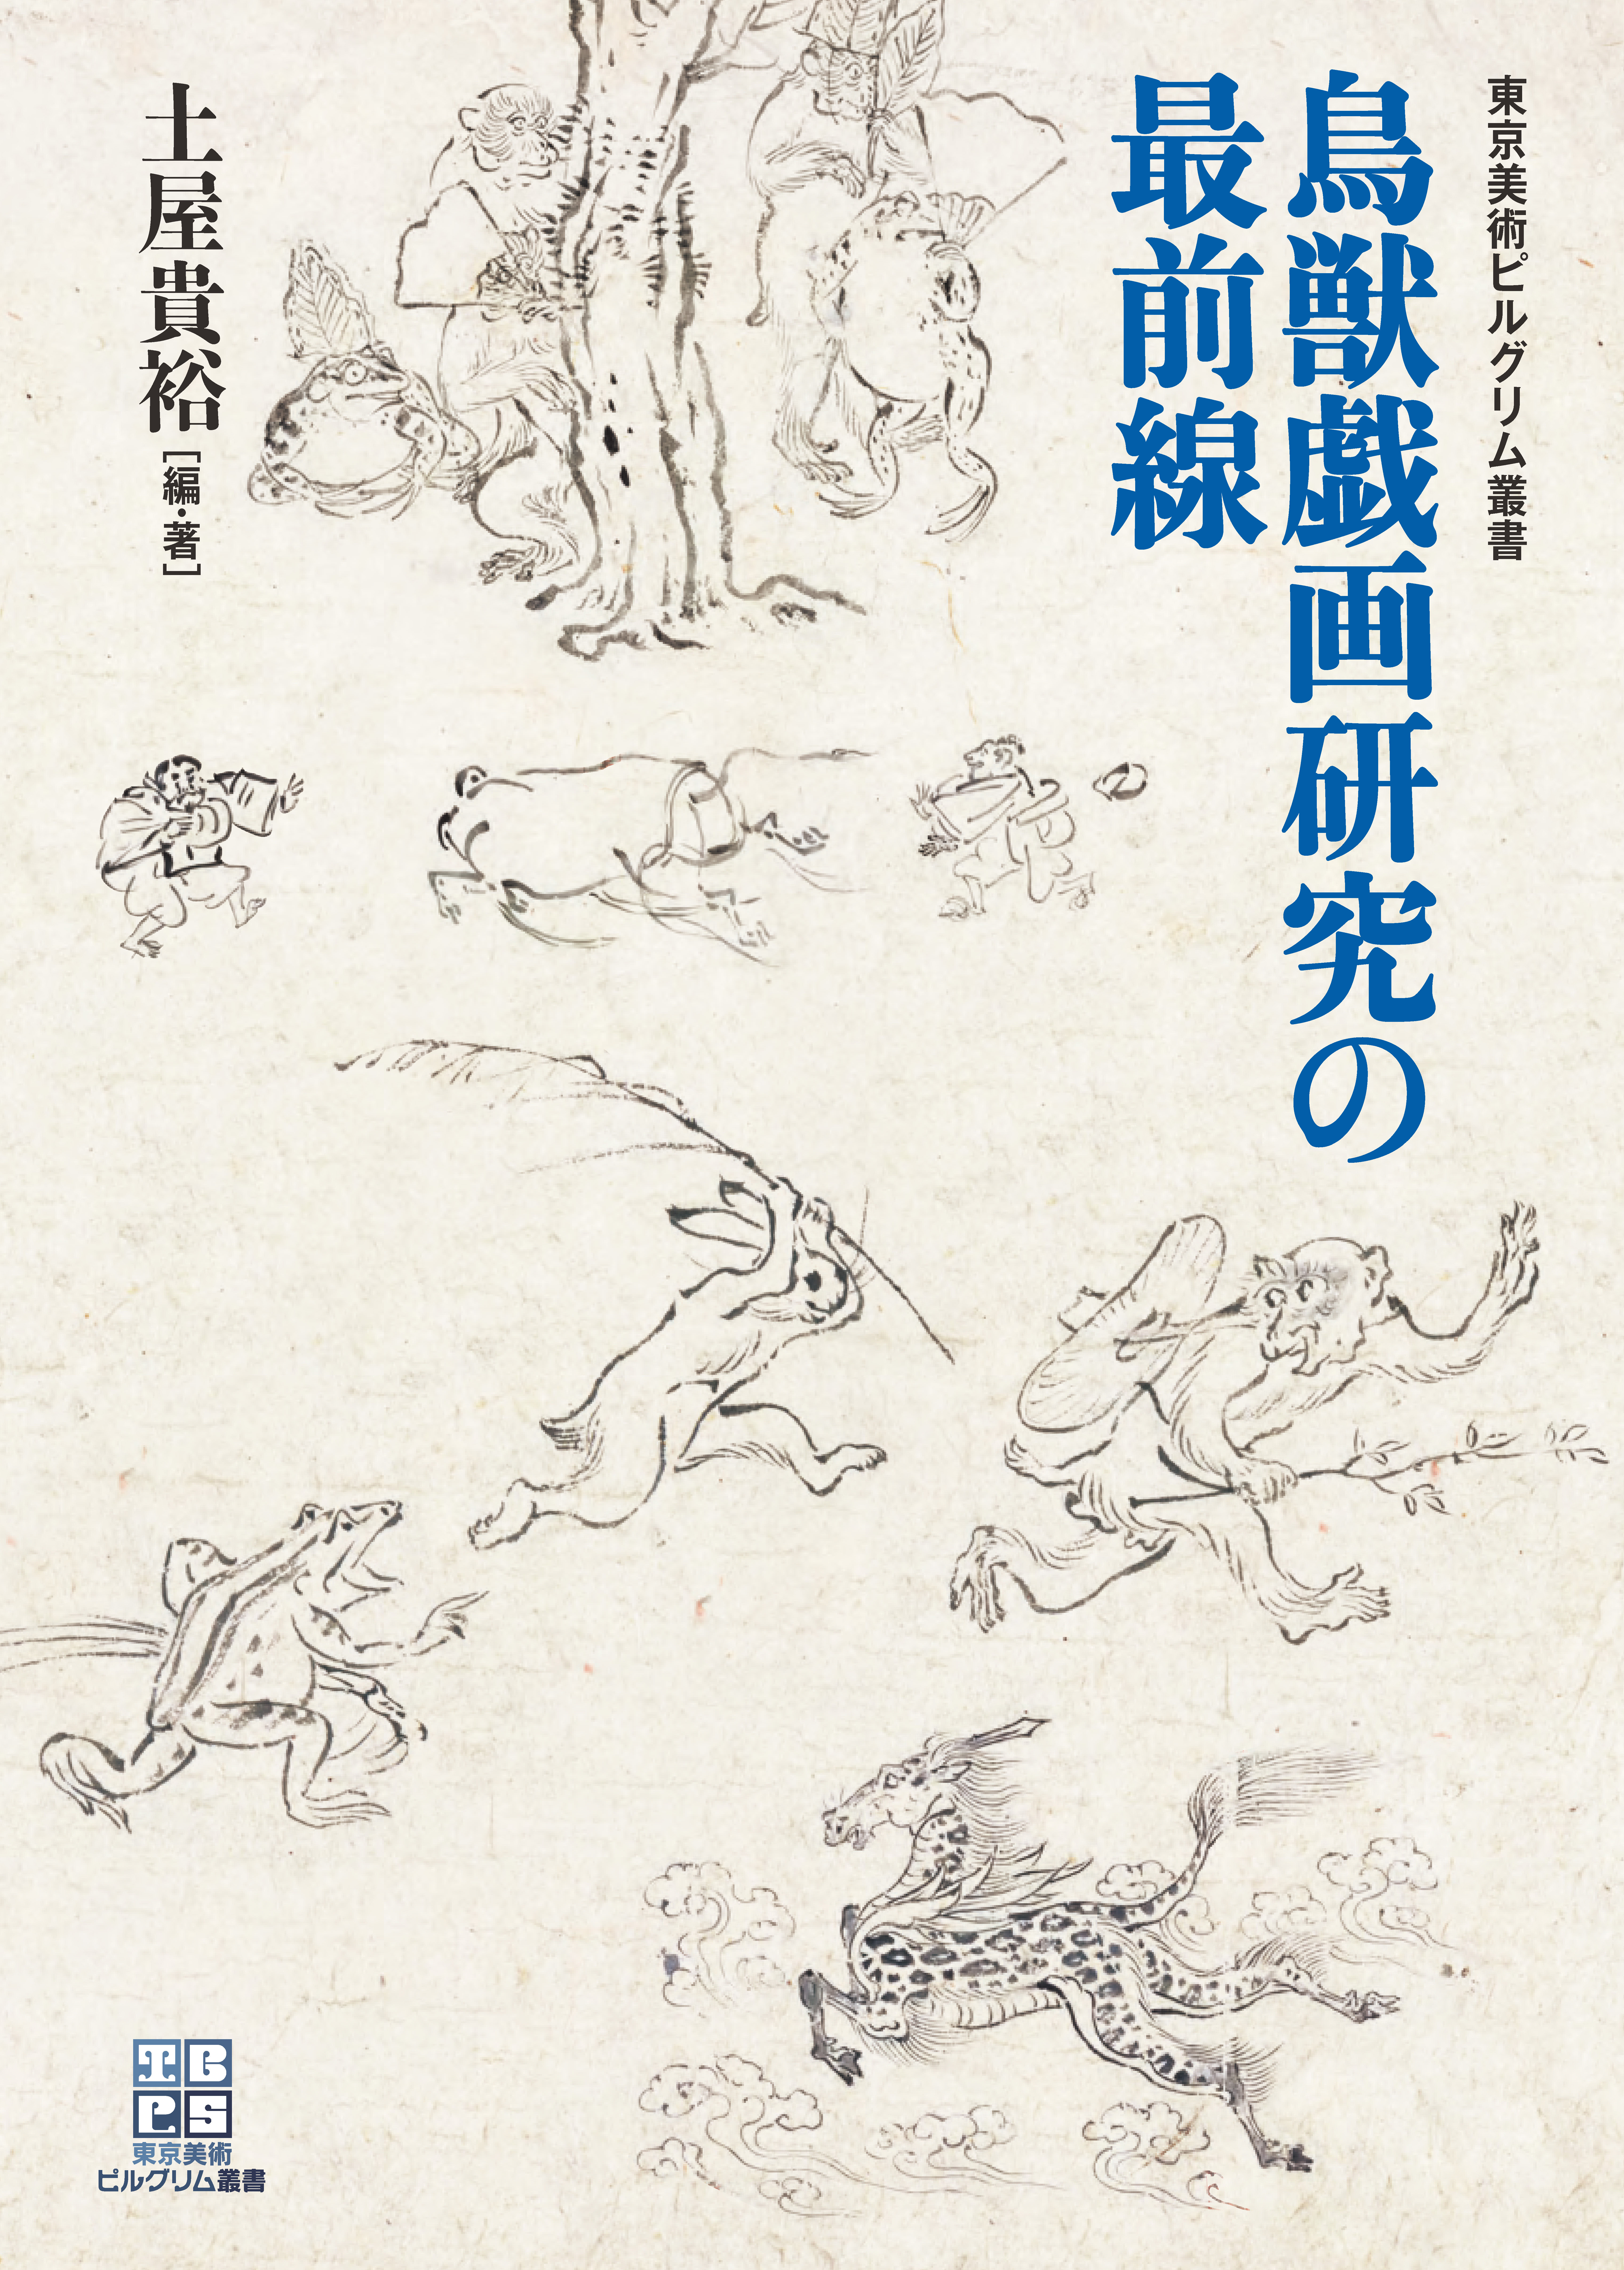 the Scrolls of Frolicking Animals